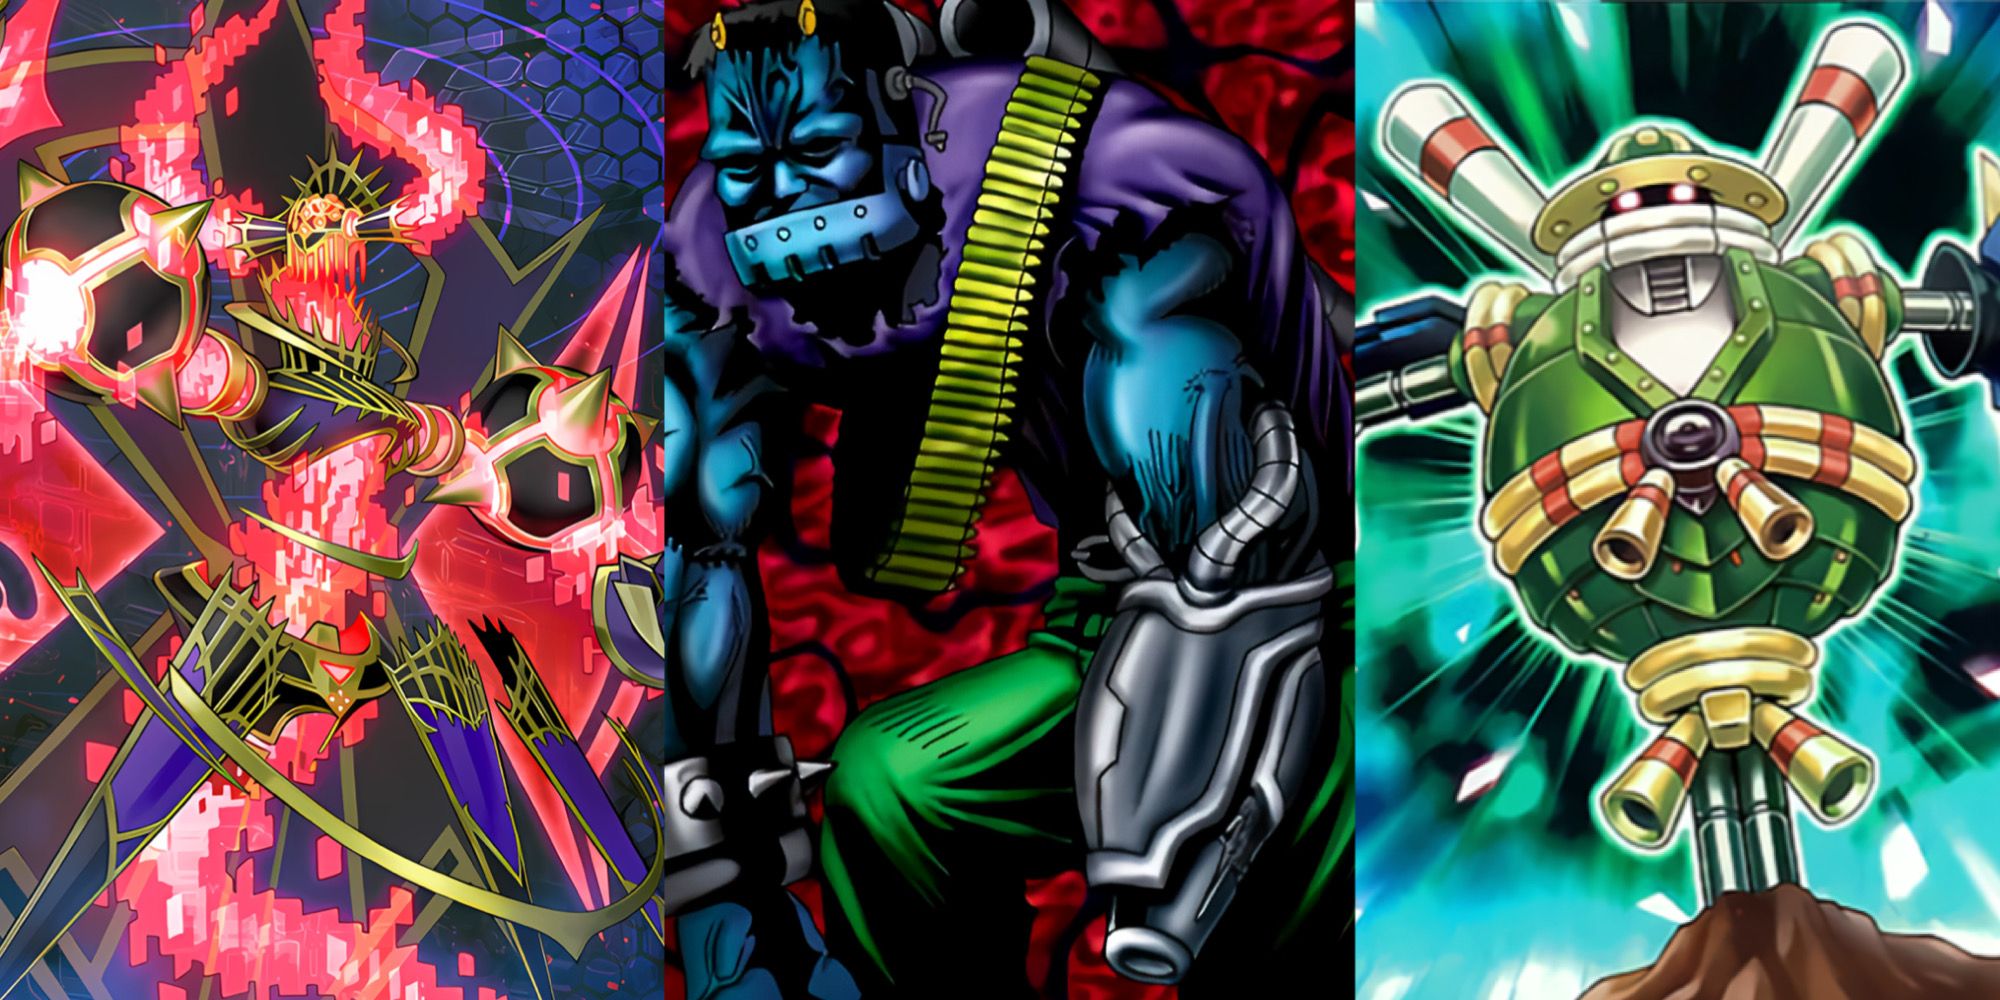 yugioh card artwork for number 89: diablosis the mind hacker, cyber stein, and superheavy samurai scarecrow